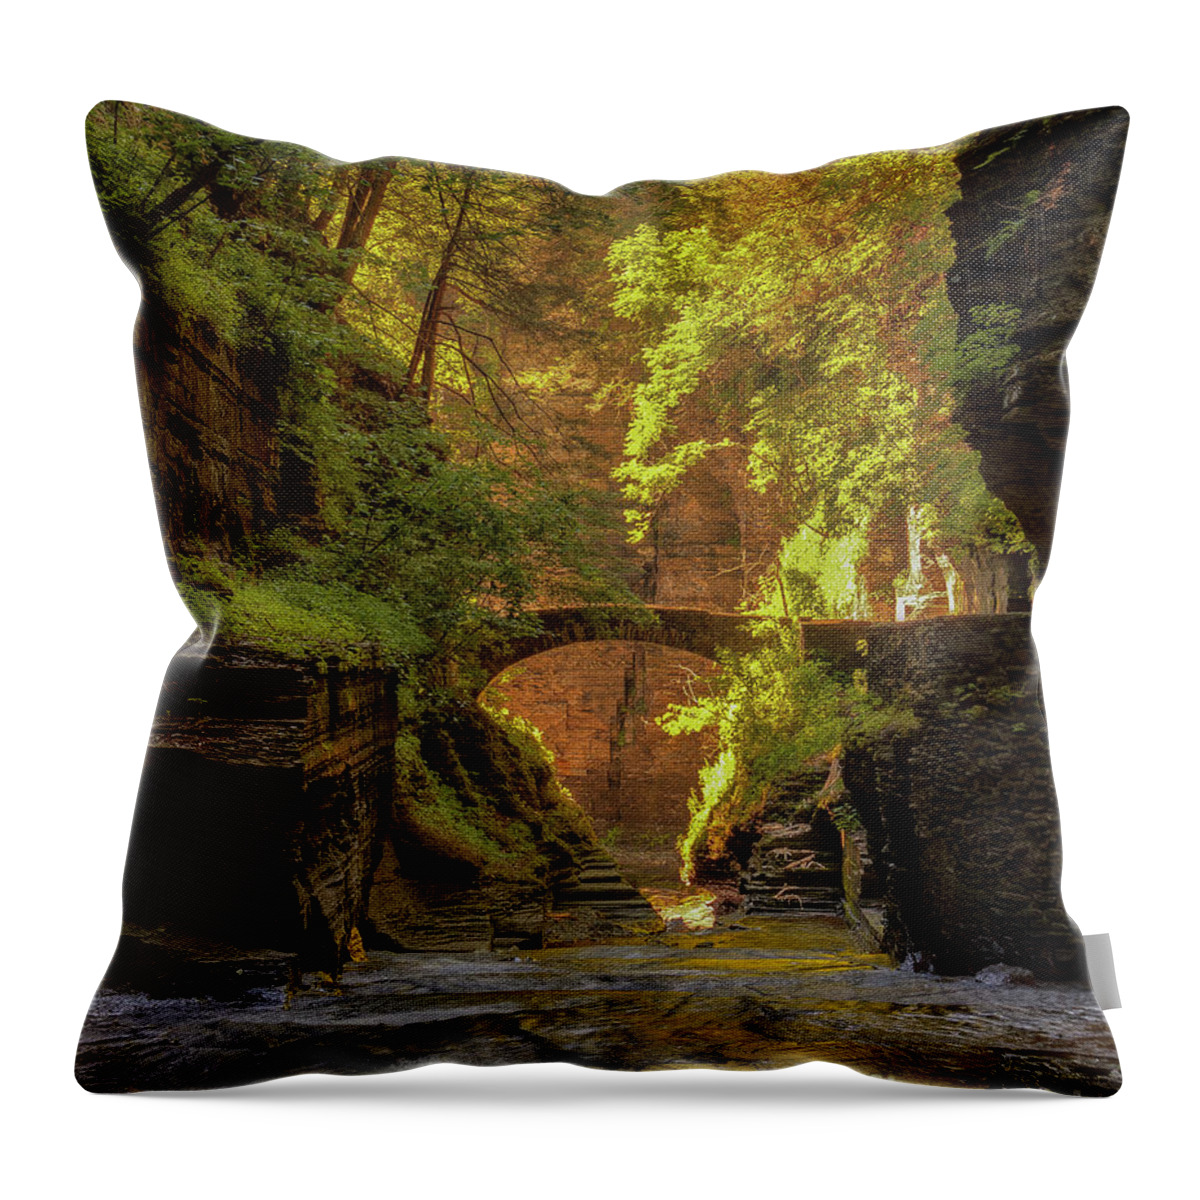 Gorge Throw Pillow featuring the photograph Rivendell Bridge by Rod Best